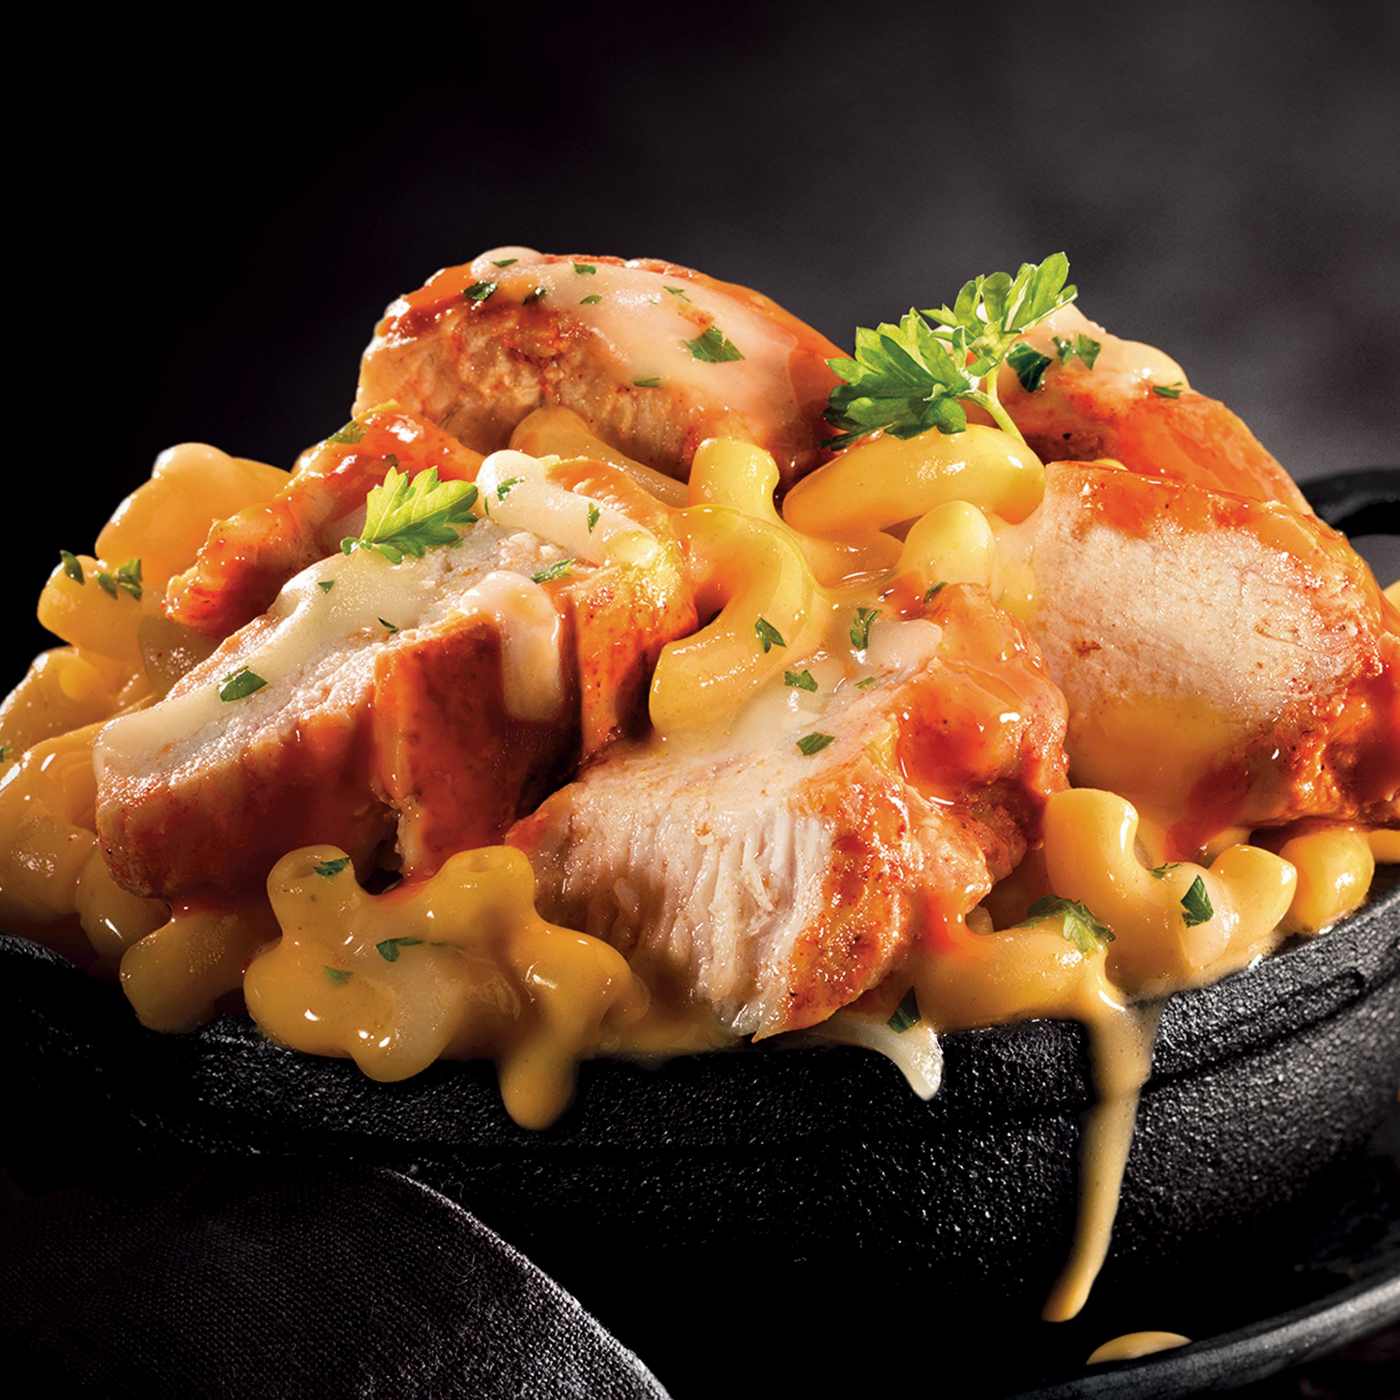 Banquet Mega Bowls 26g Protein Buffalo-Style Chicken Mac 'n Cheese Frozen Meal; image 7 of 7